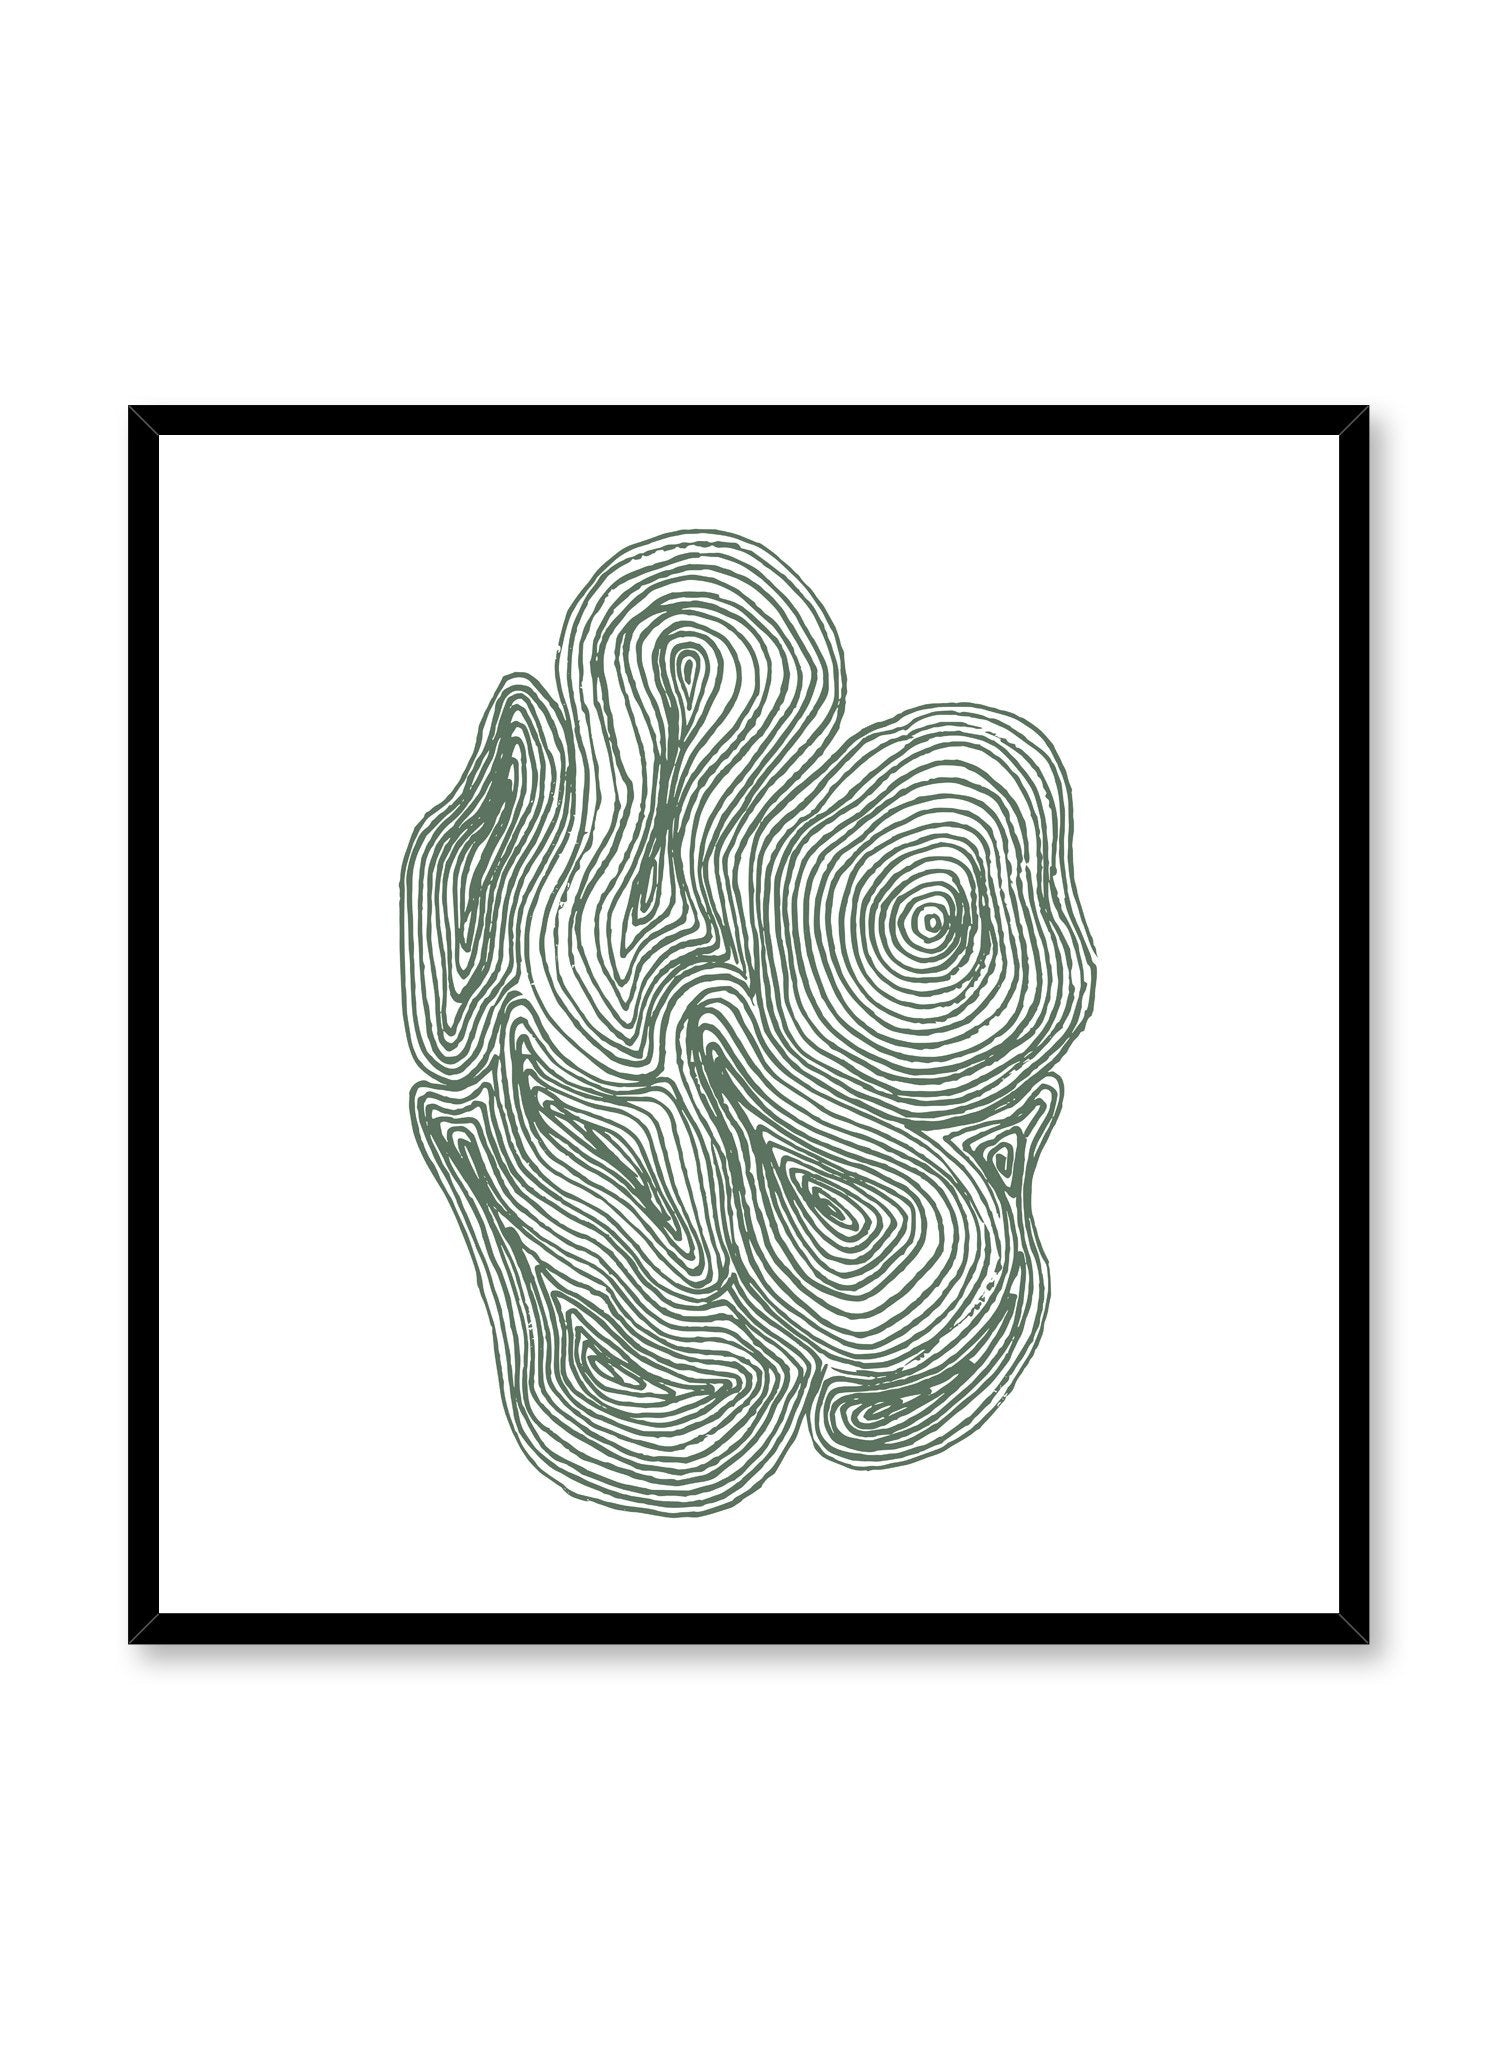 Modern minimalist abstract artwork by Opposite Wall with Cluster of Swirls in Green